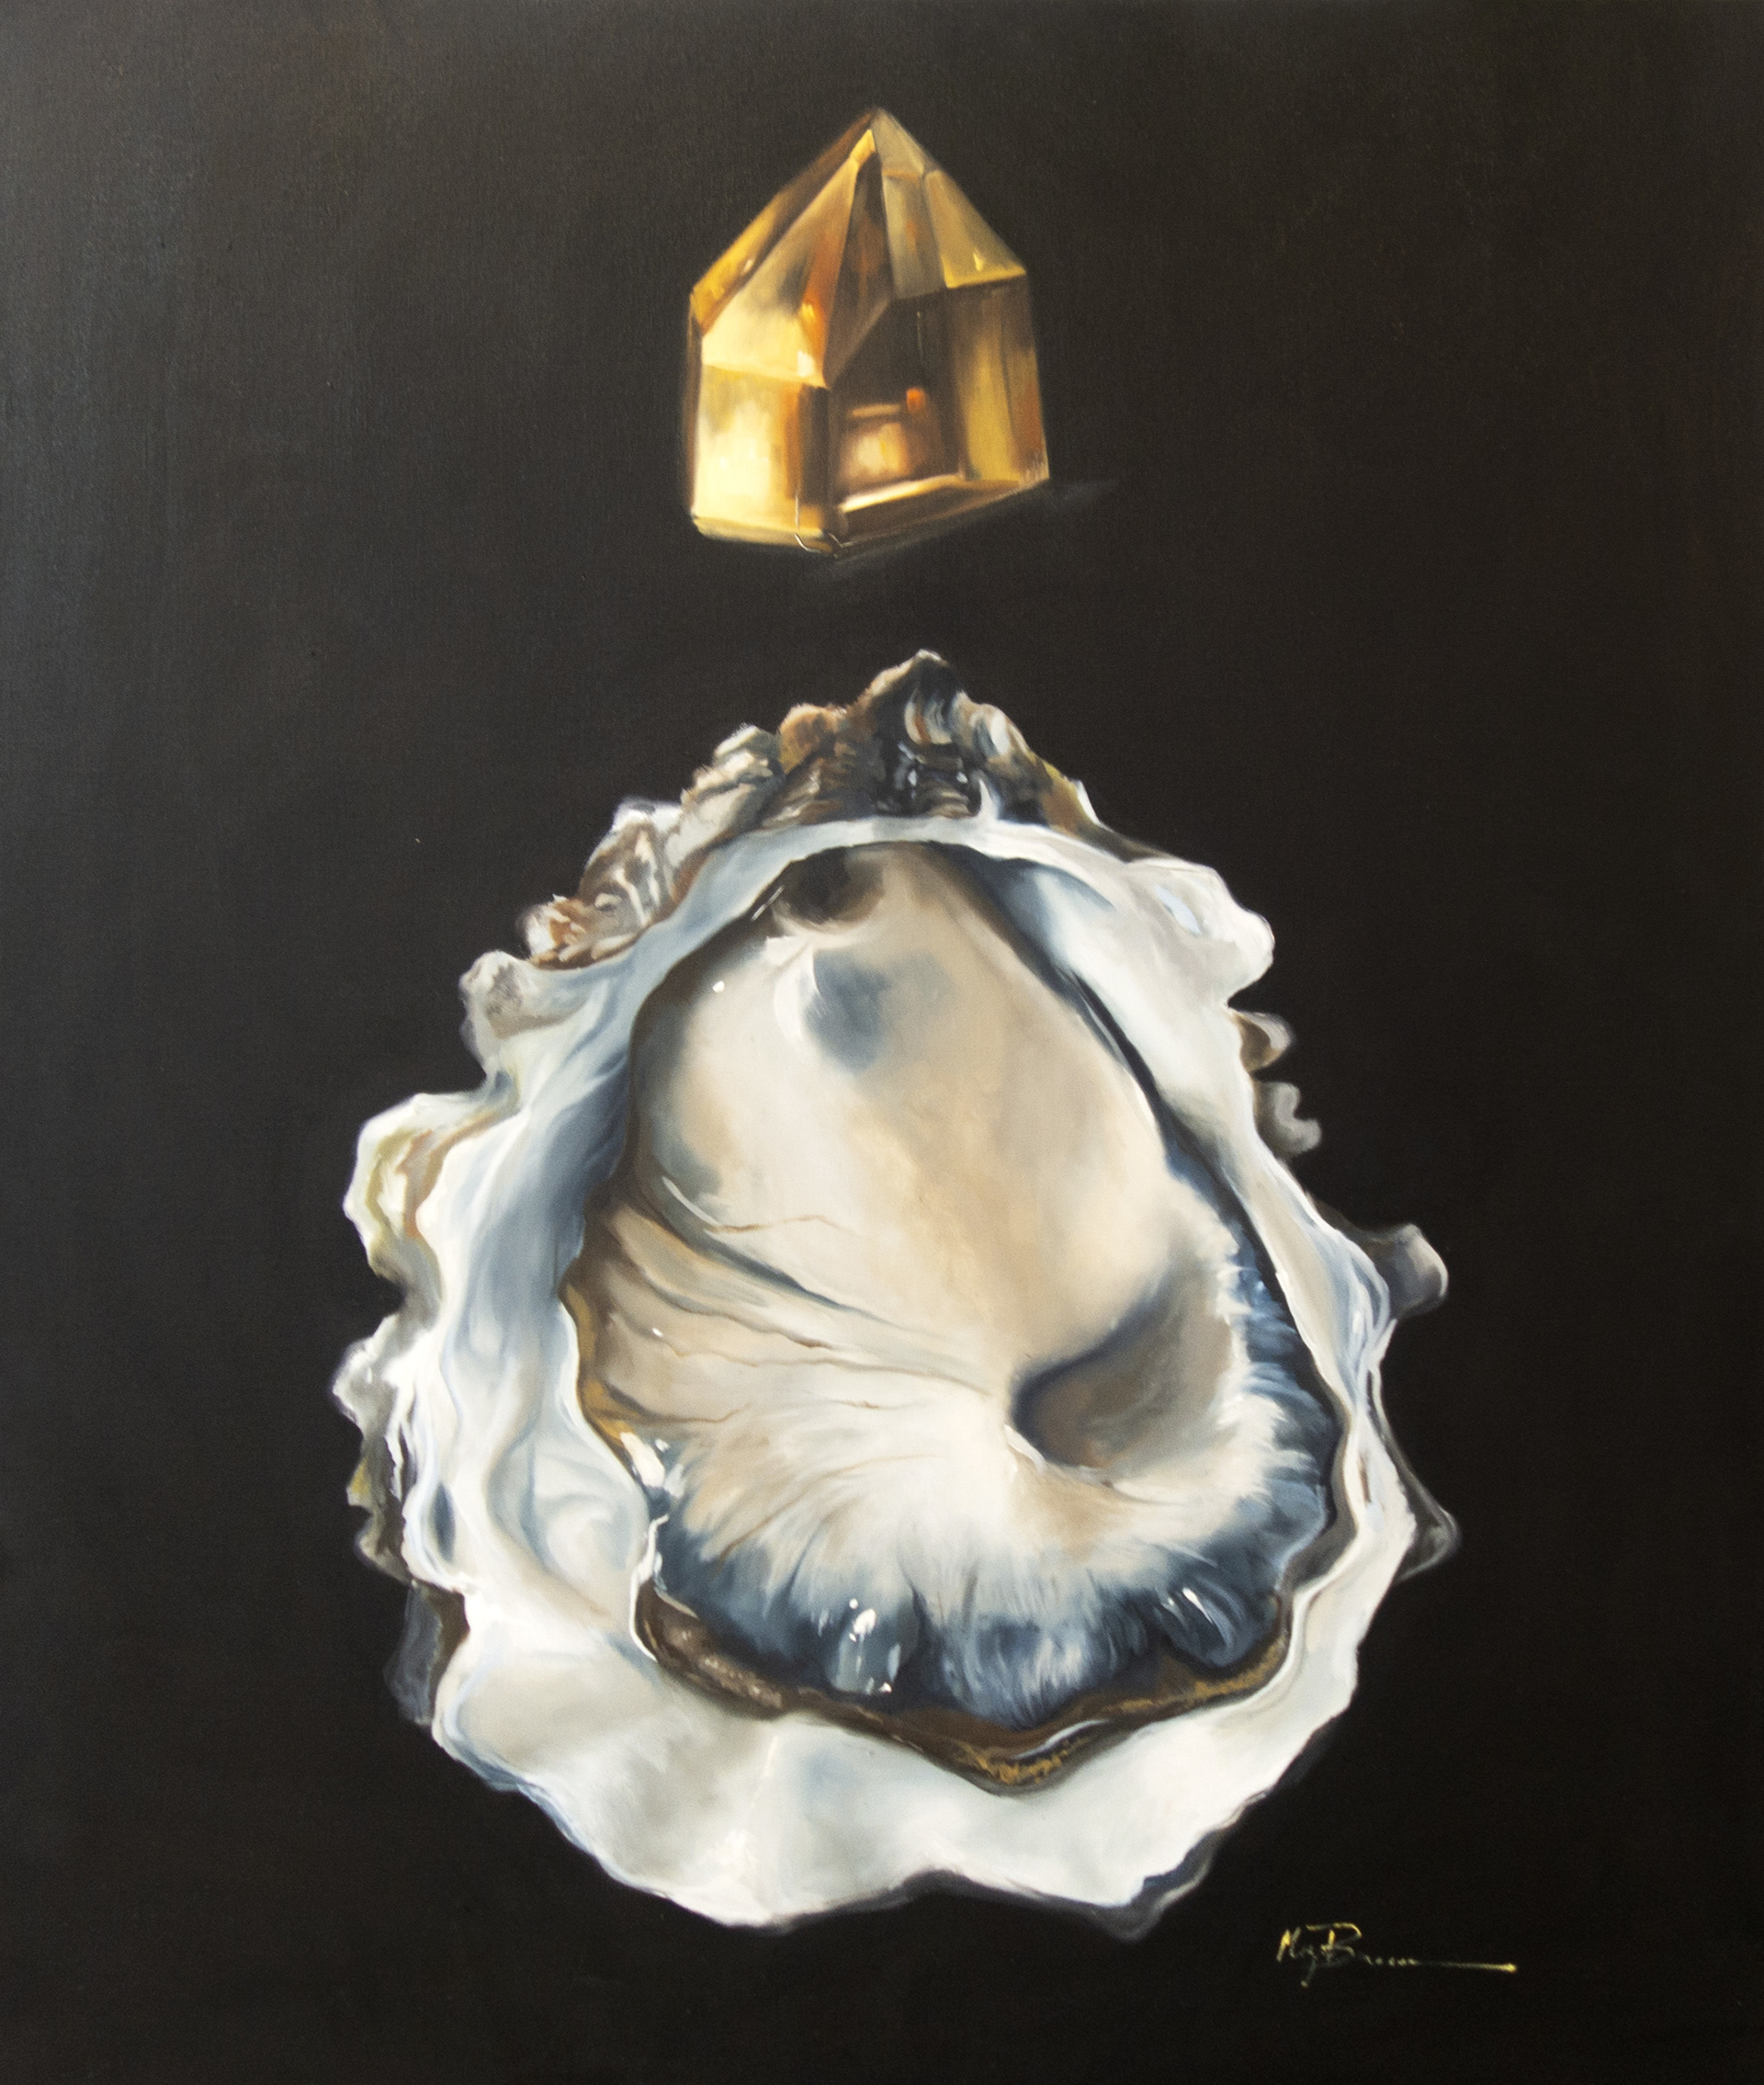 Oyster and Citrine, the Manifestation of Joy and Overcoming by Megan Buccere